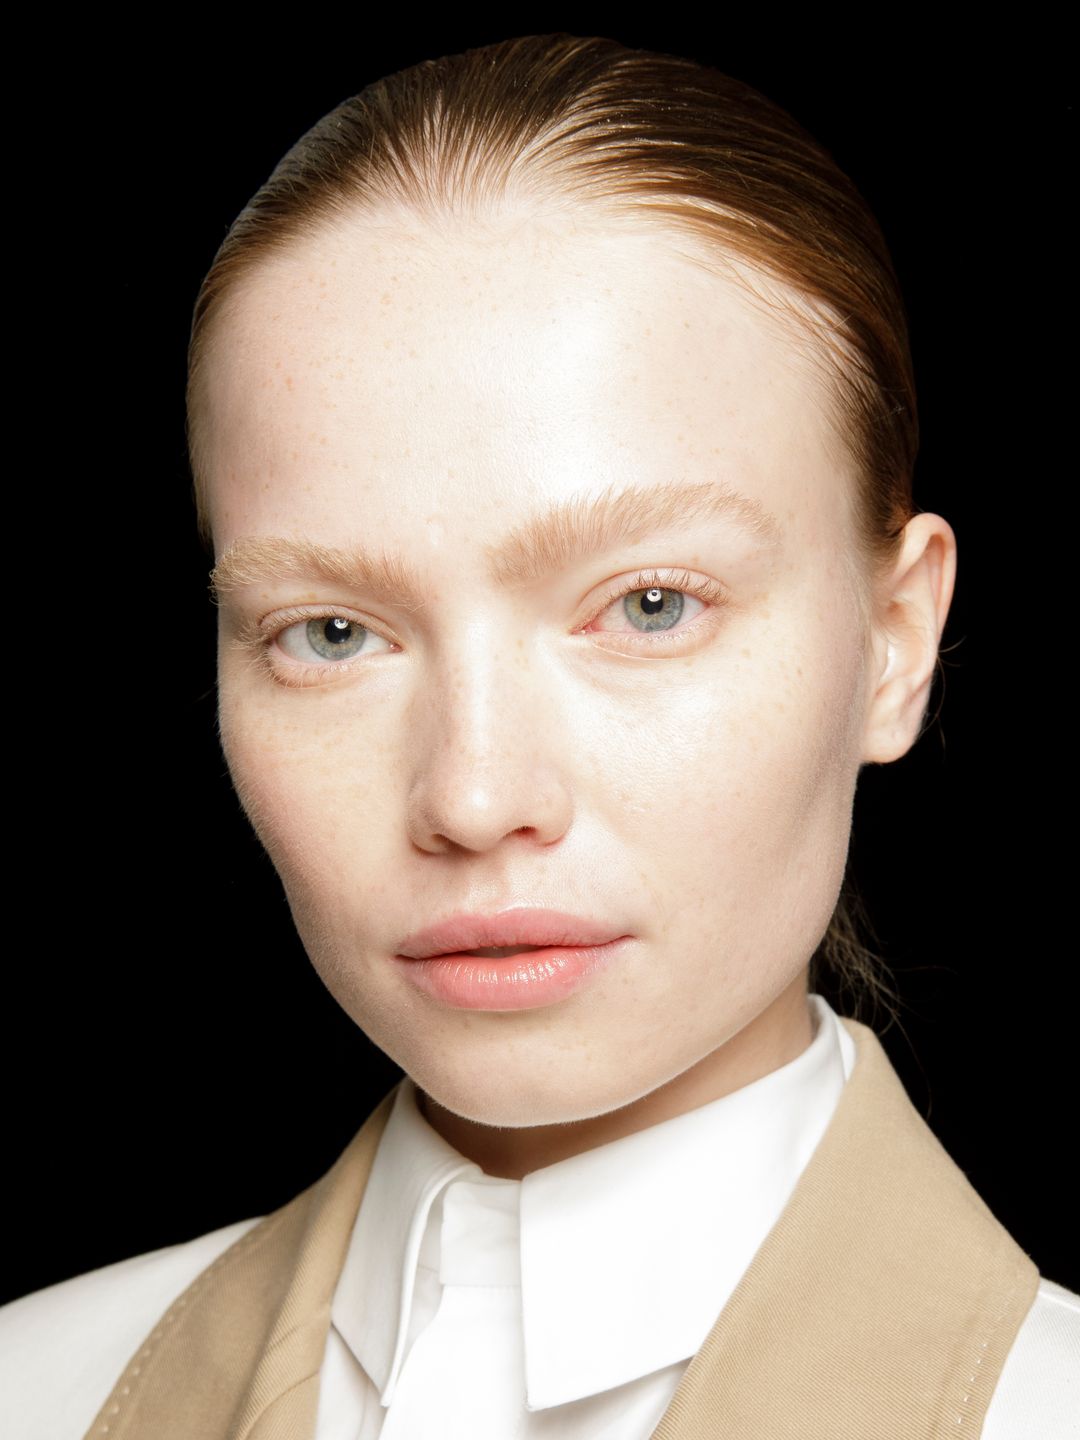 Model with clear, glowing skin 